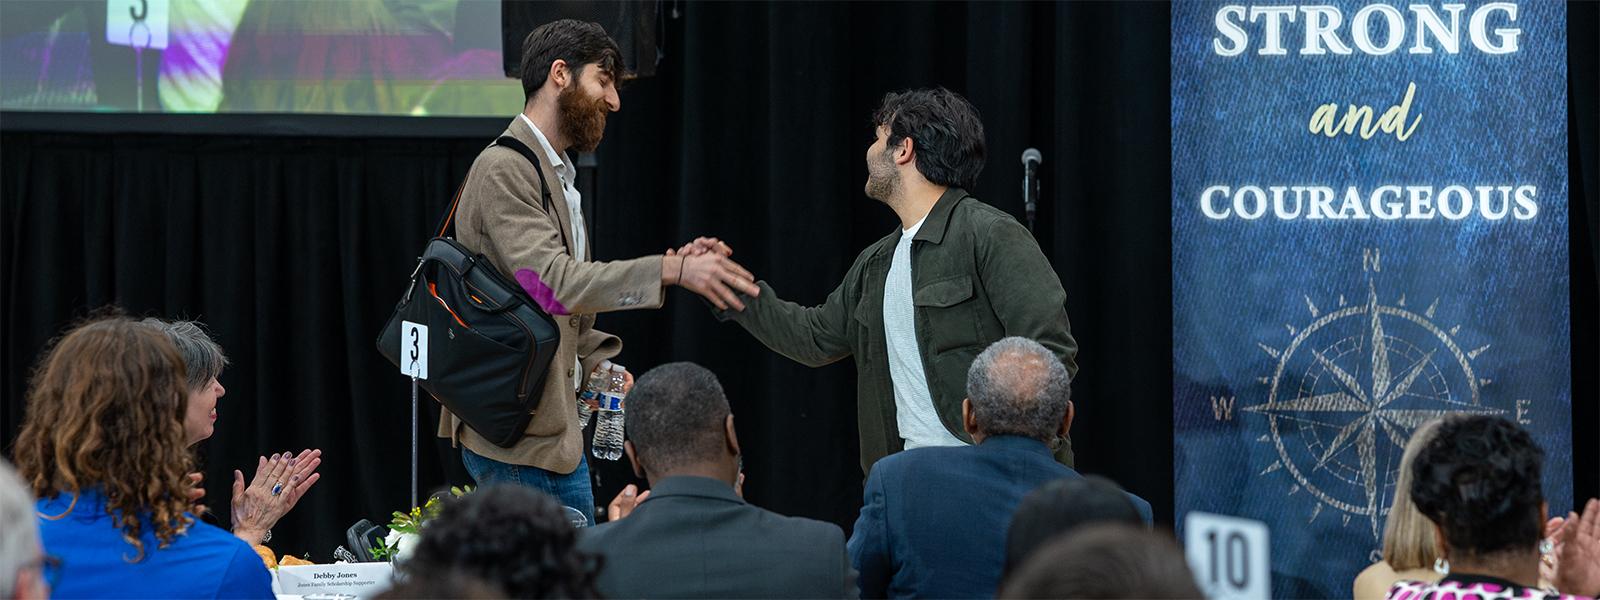 Gvidon Stamboltsyan, a student from Armenia, (left) greets "M," a student from Azerbaijan on the platform at the Partner Appreciation Lunch. (Photo by Noah Allard)